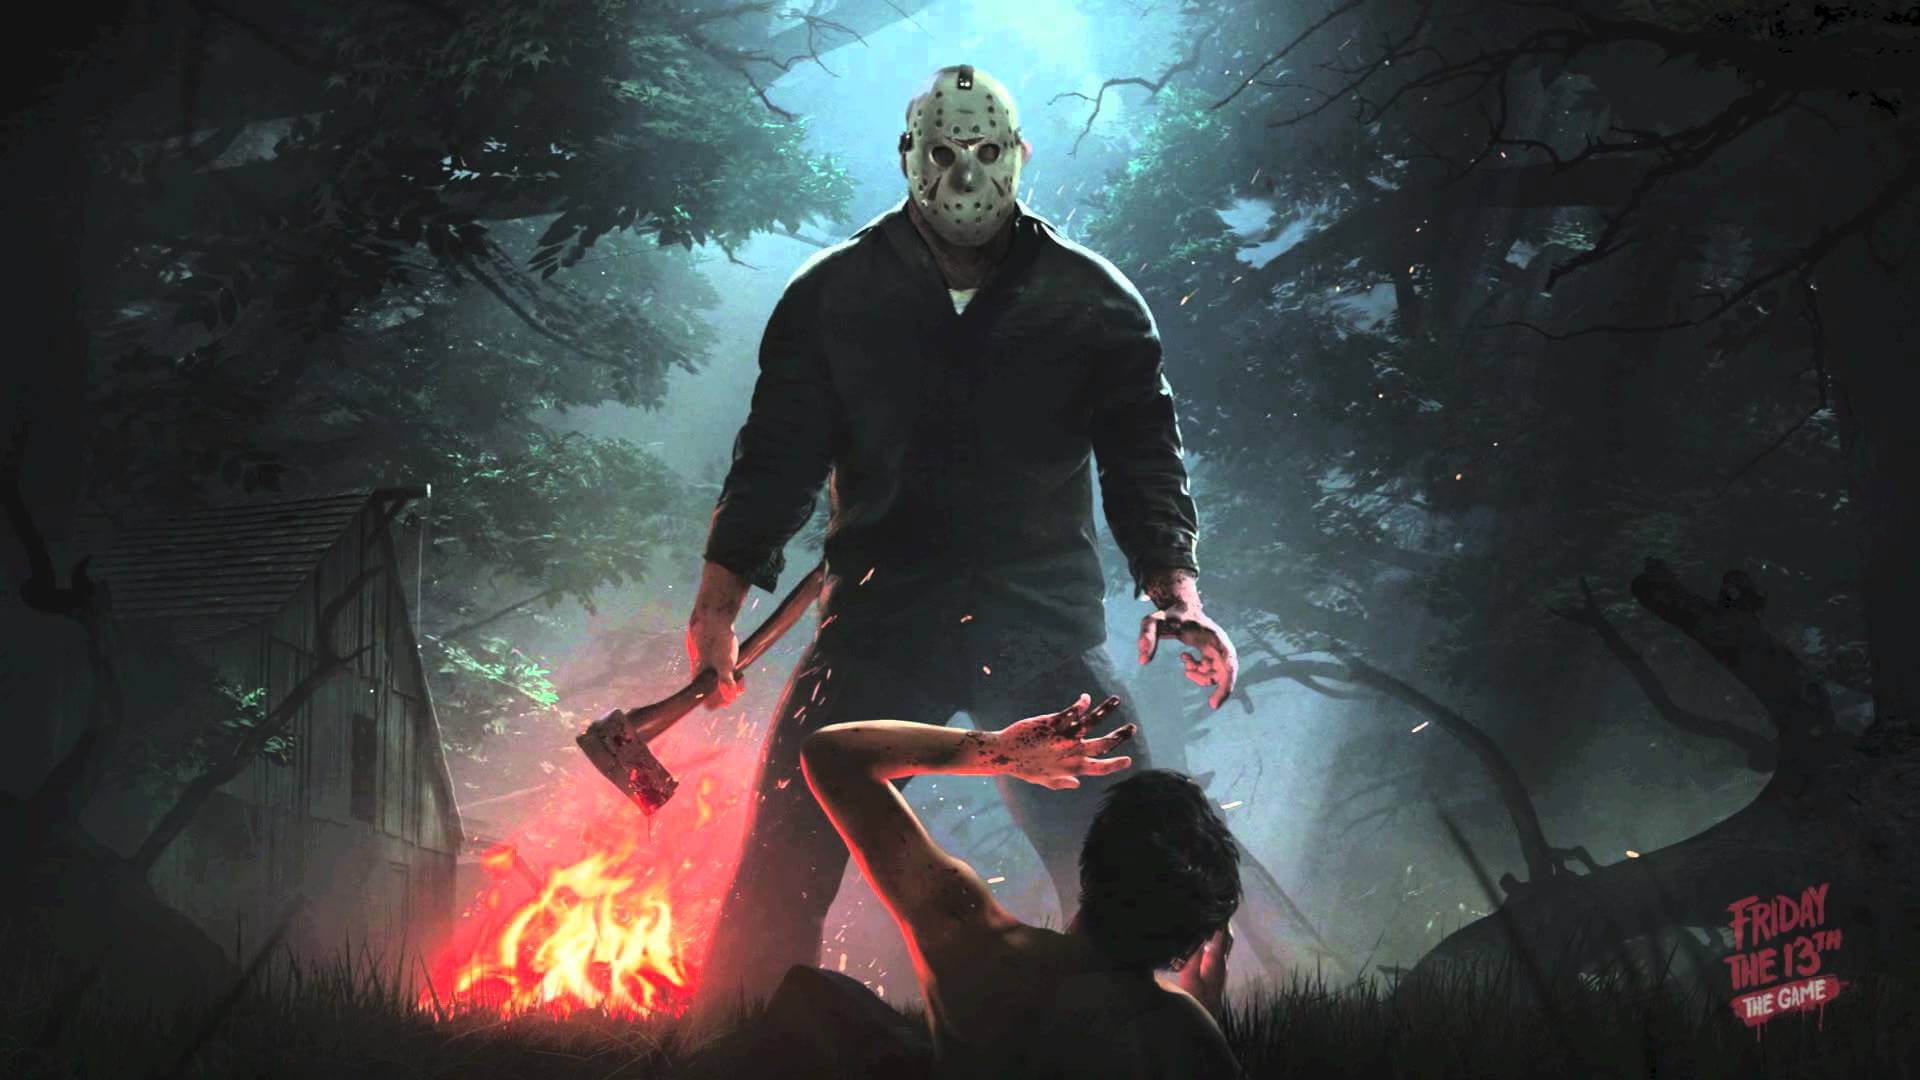 Friday the 13th game cover art. Jason holding axe with counselor on ground